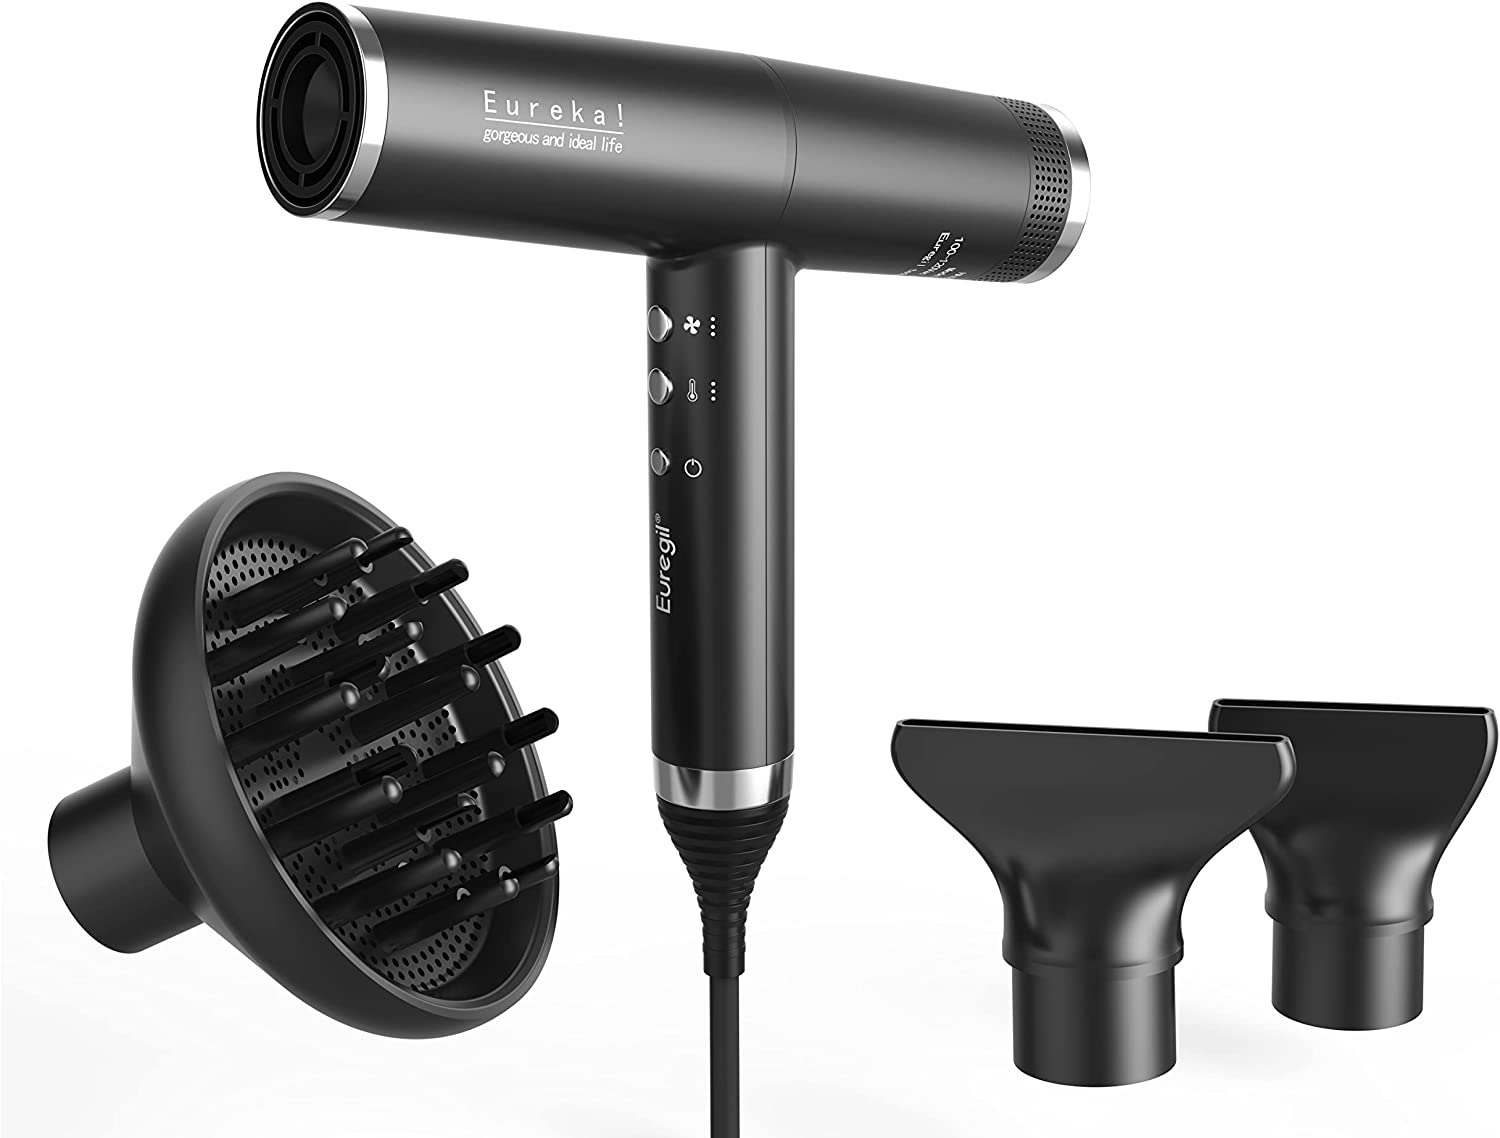  Euregil Professional Ionic Hair Dryer with Diffuser